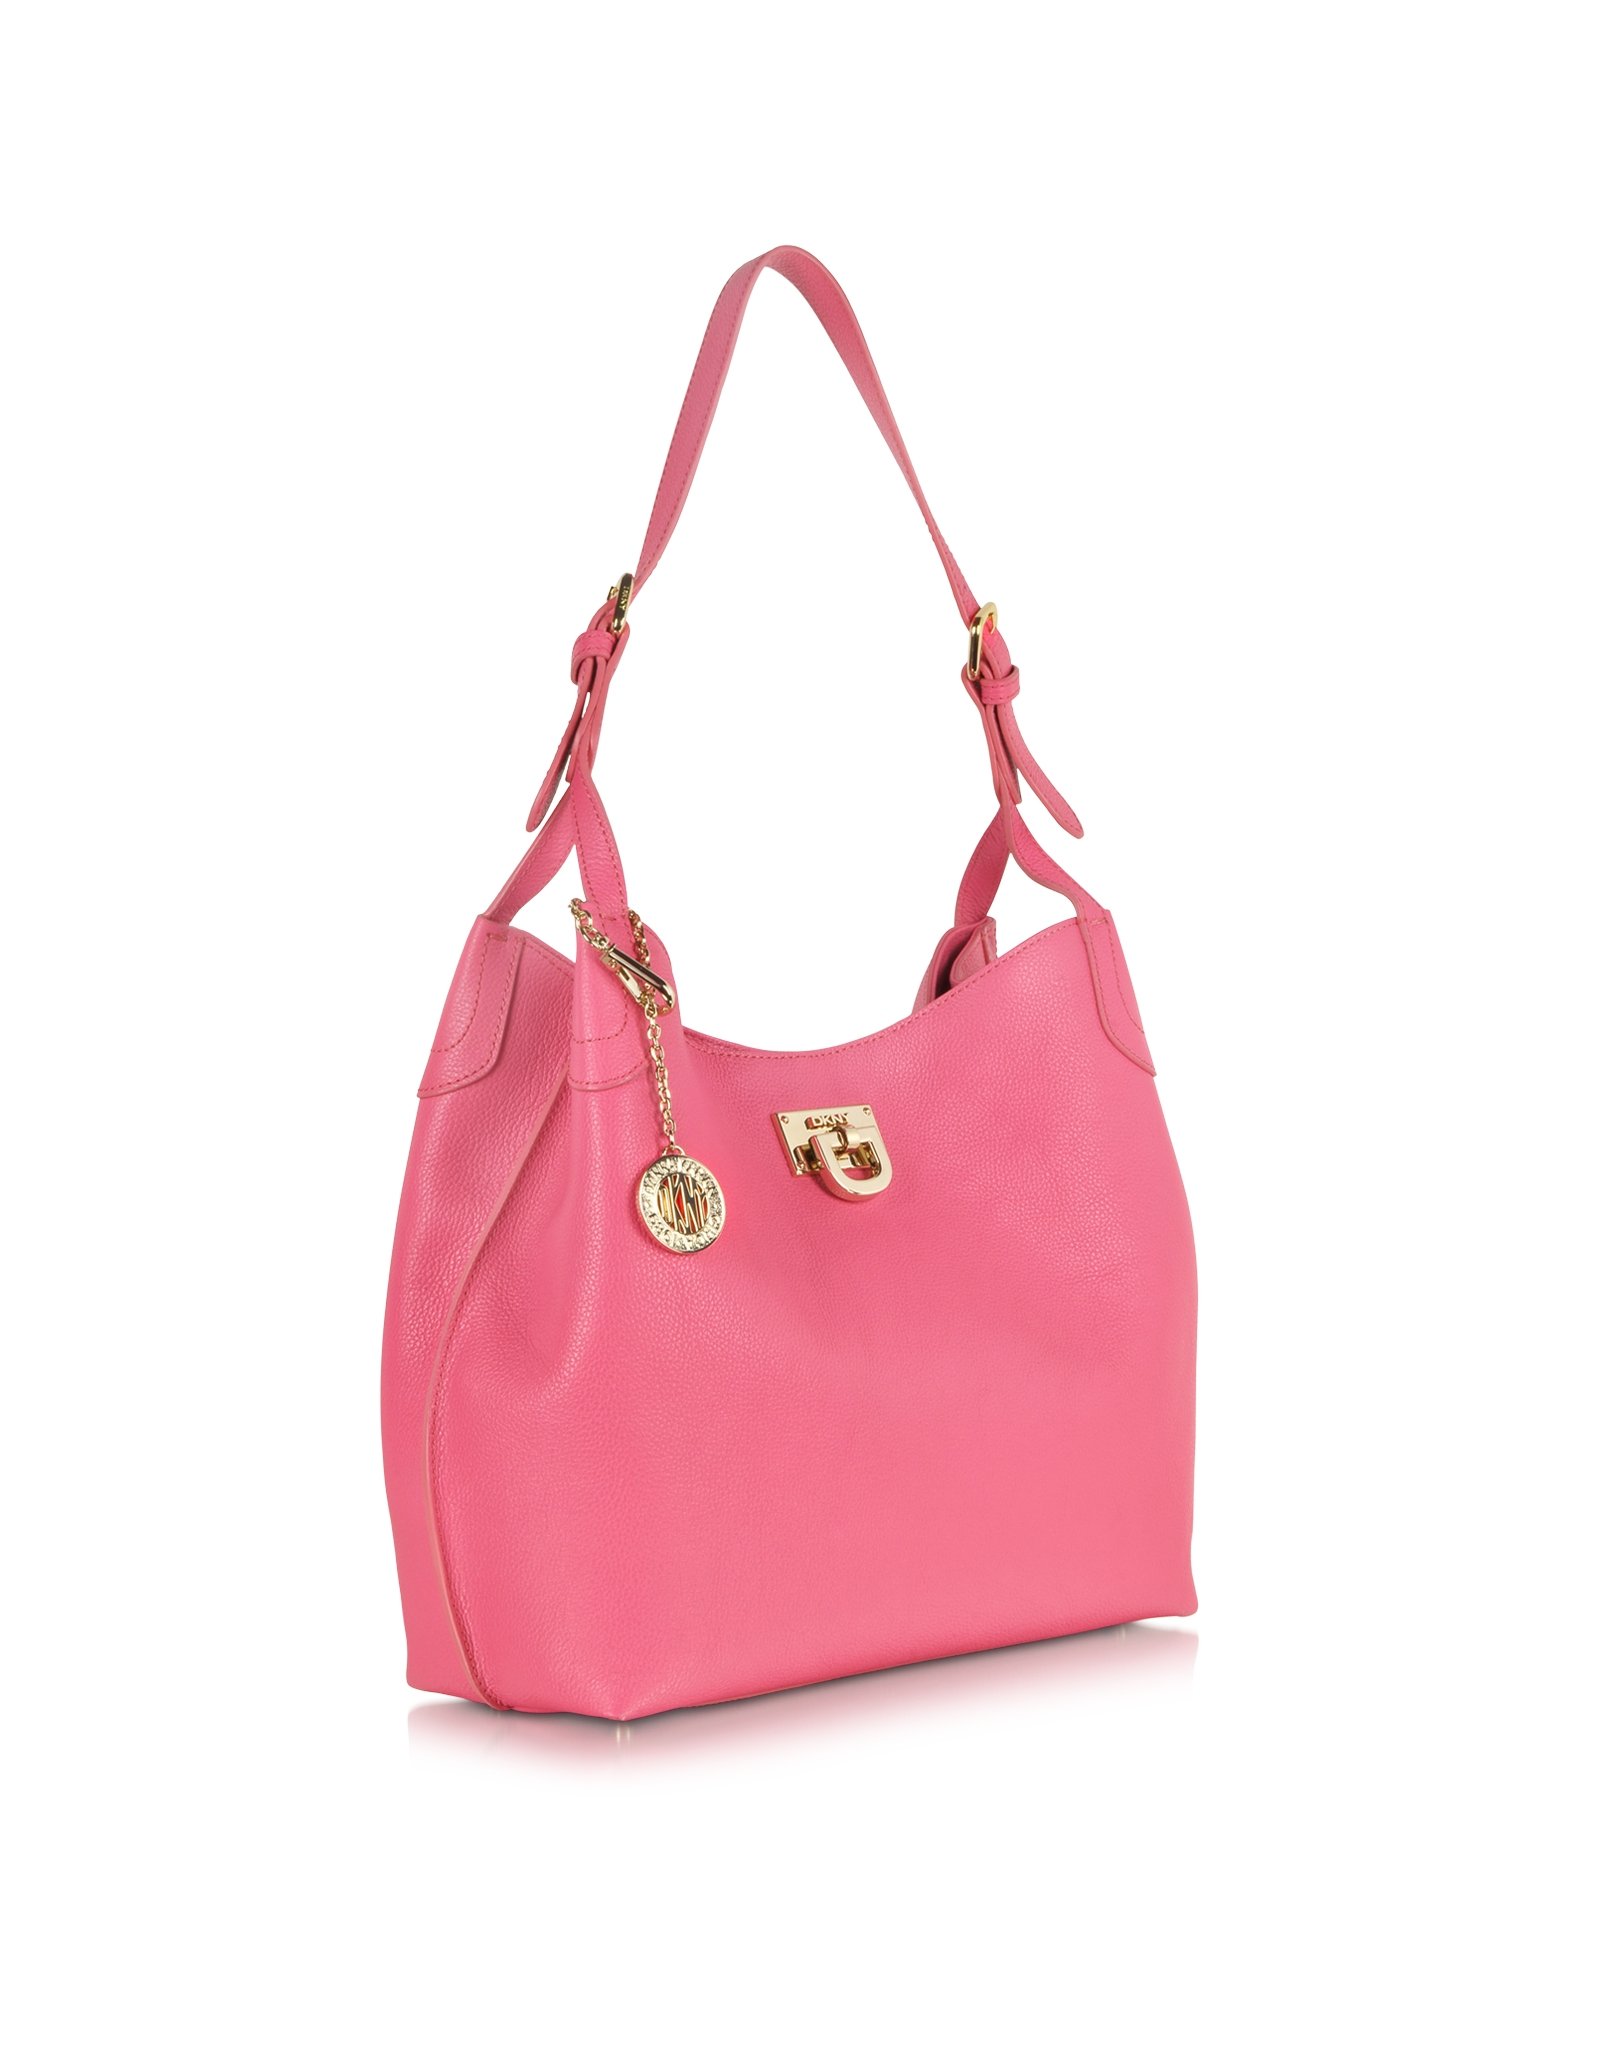 Dkny Chelsea Leather Hobo Bag in Pink | Lyst